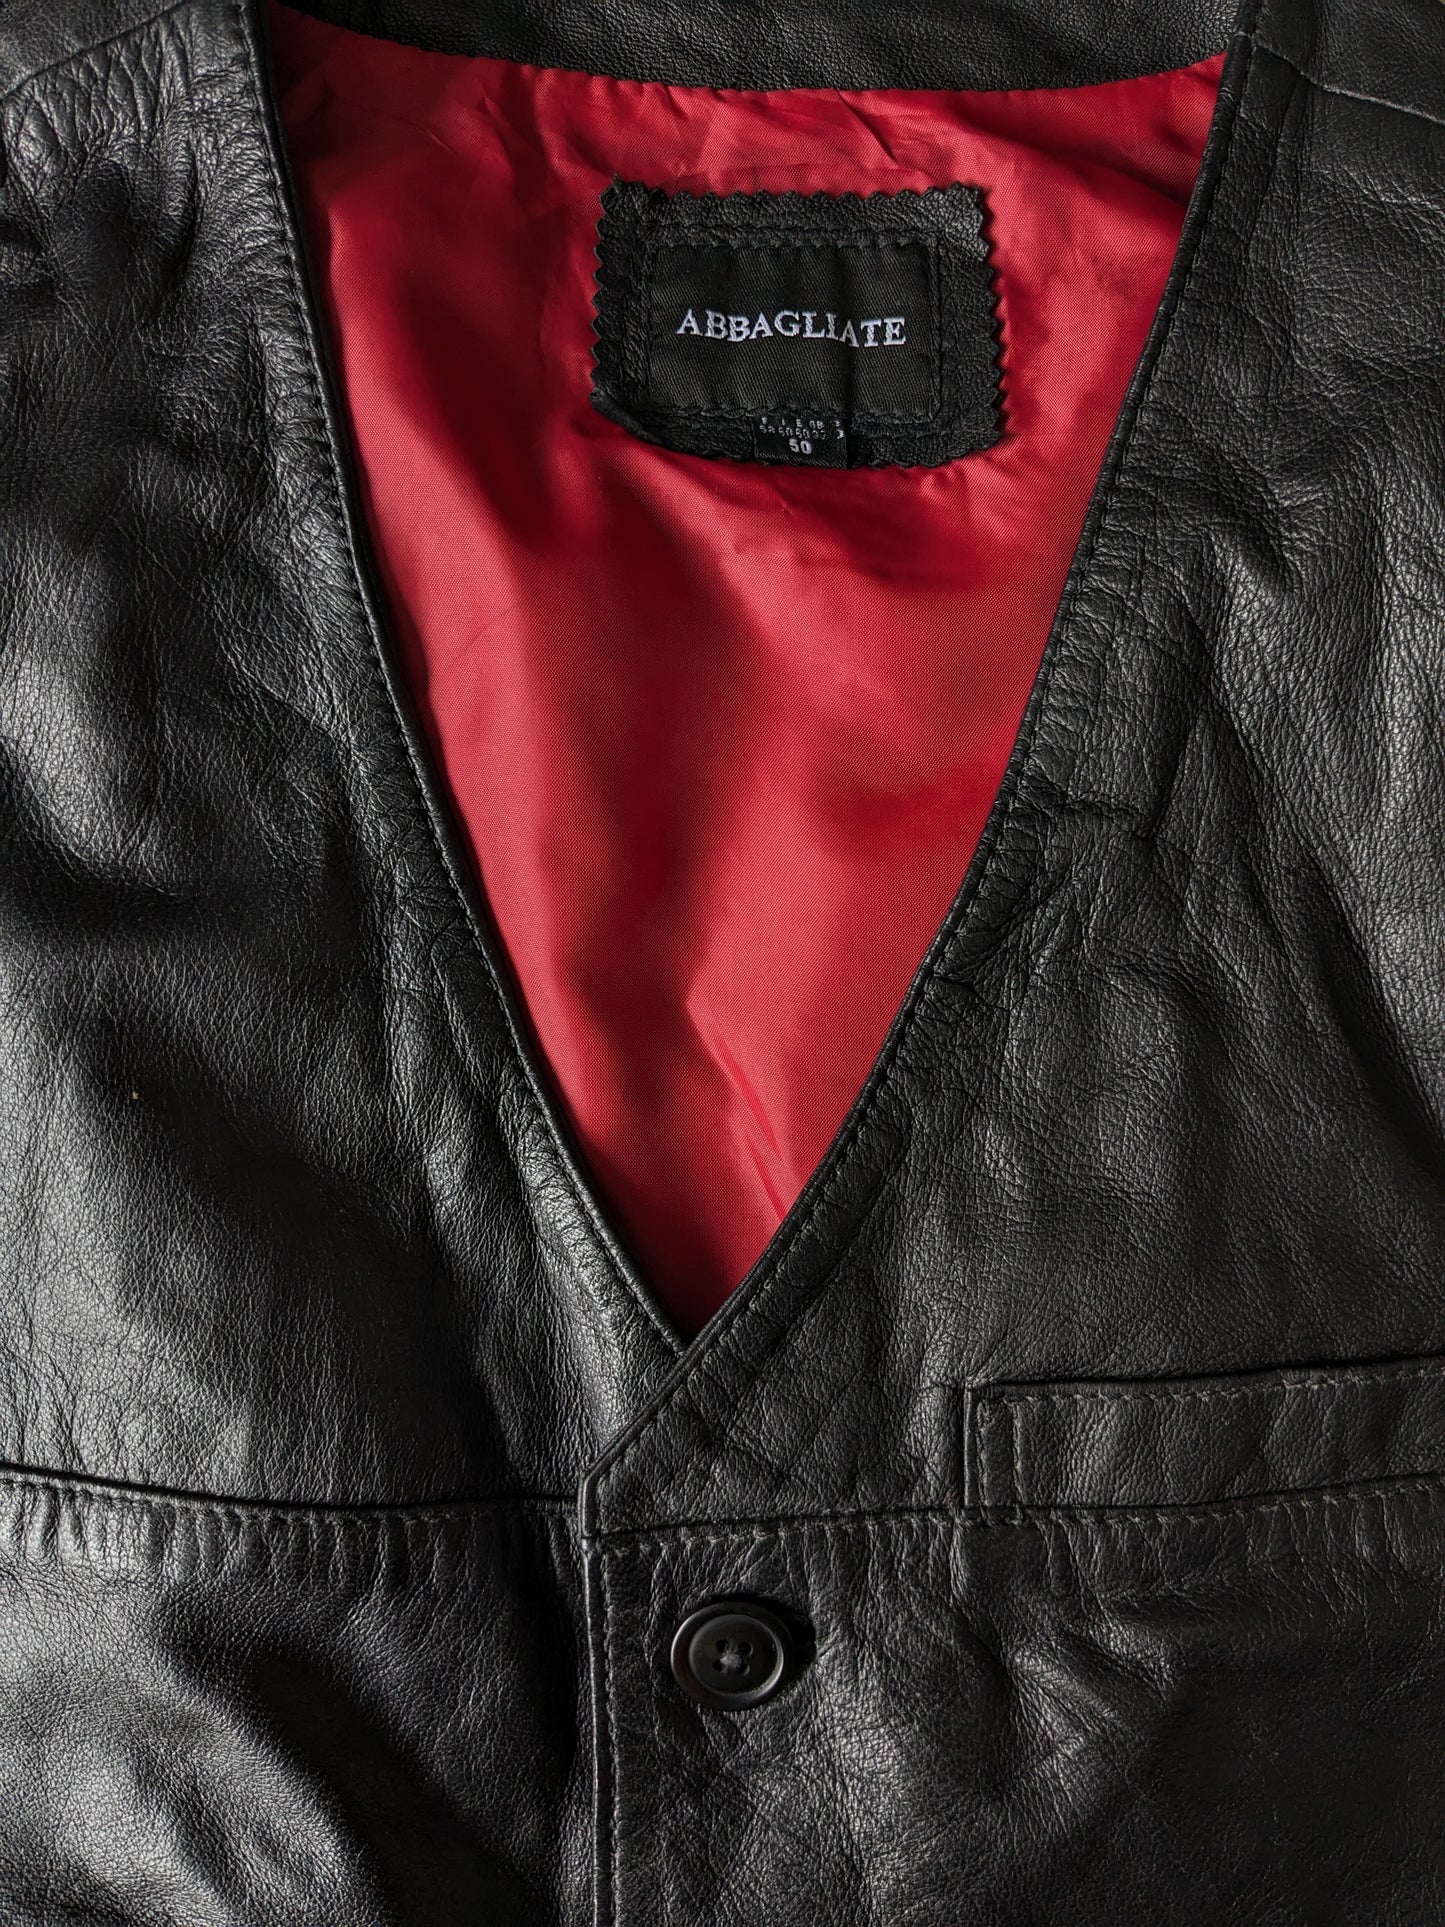 Double -sided abbagliate leather waistcoat with 3 inner pockets. Black. Size 50 / M